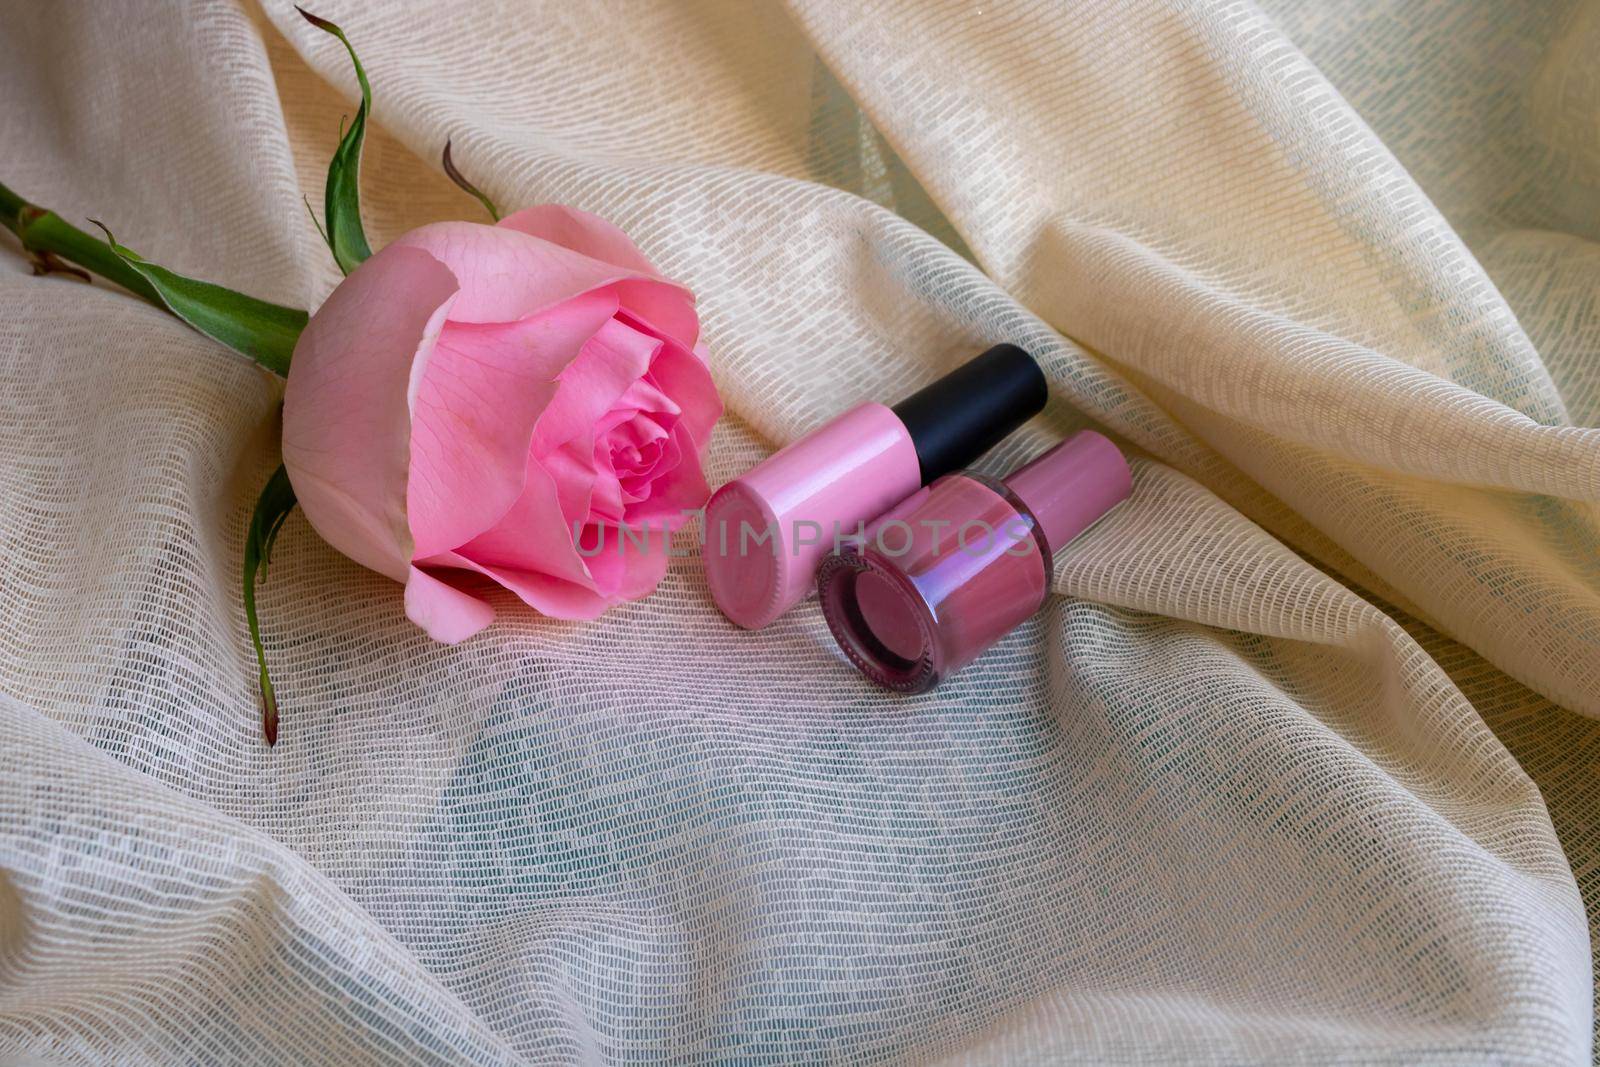 Pink rose and bottles of nail polish are on the pink tulle.